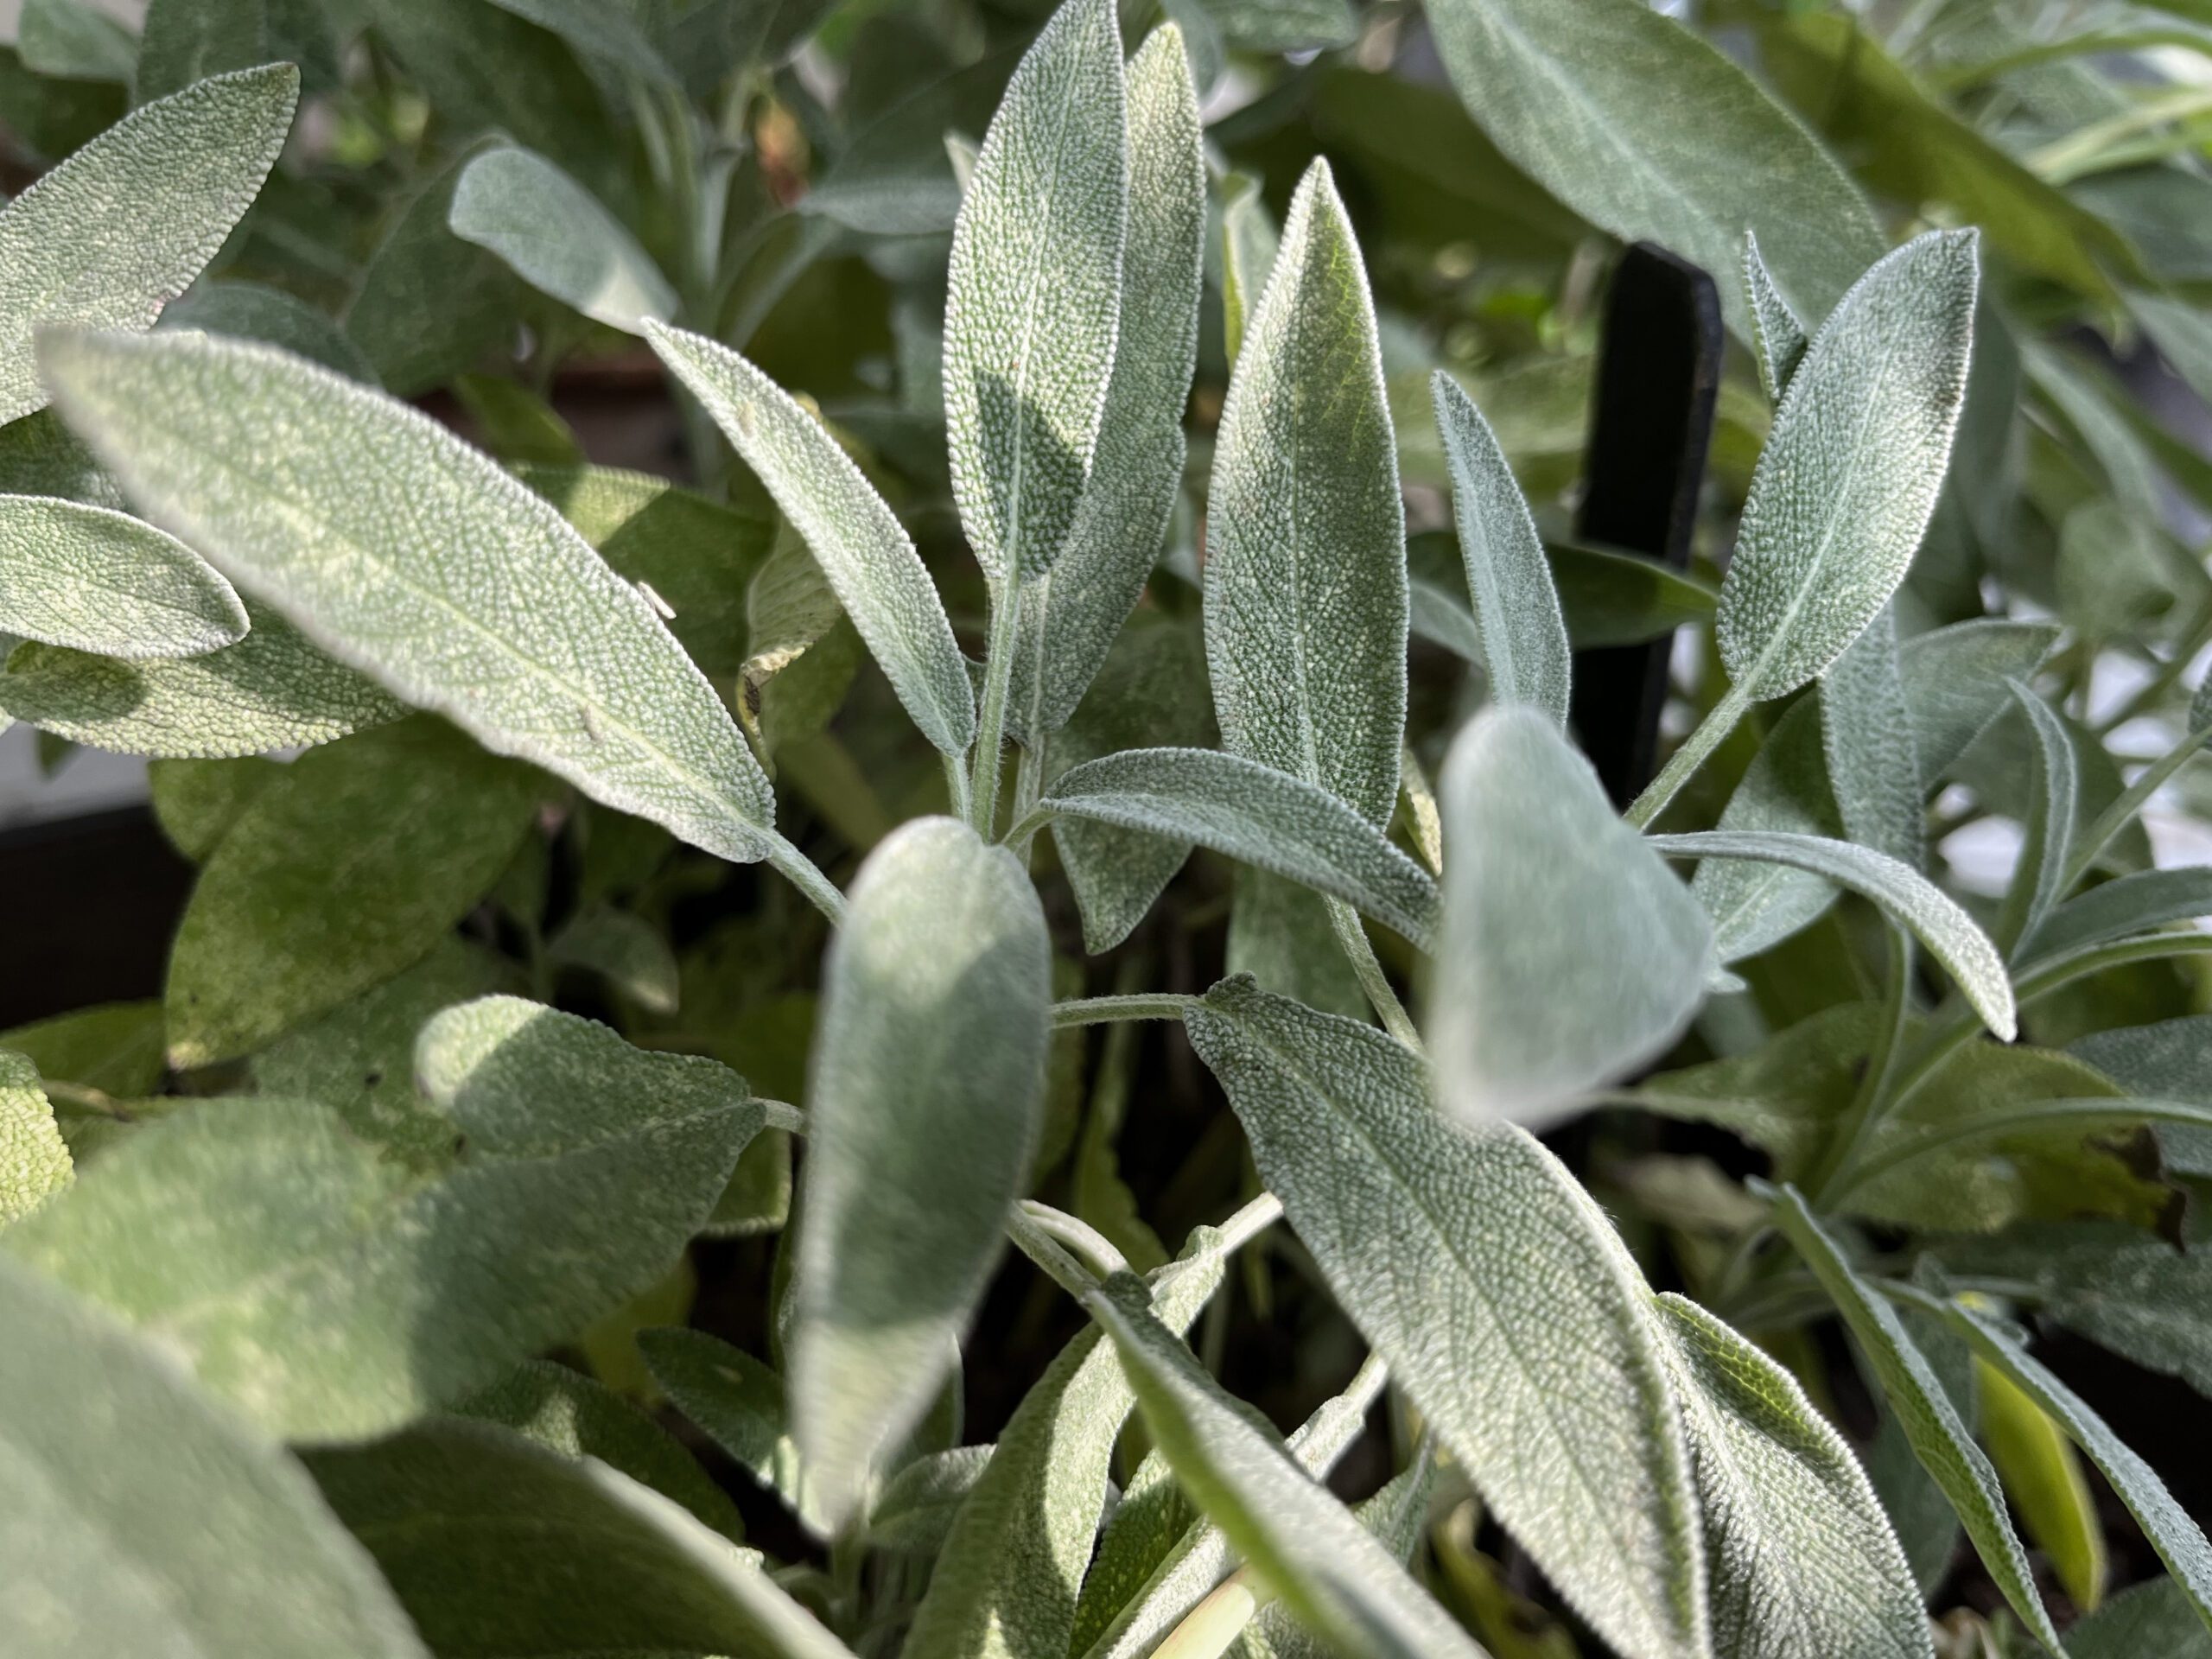 Close-up of the sage plant's oblong and gnarled green leaves. A little sunlight falls on them.